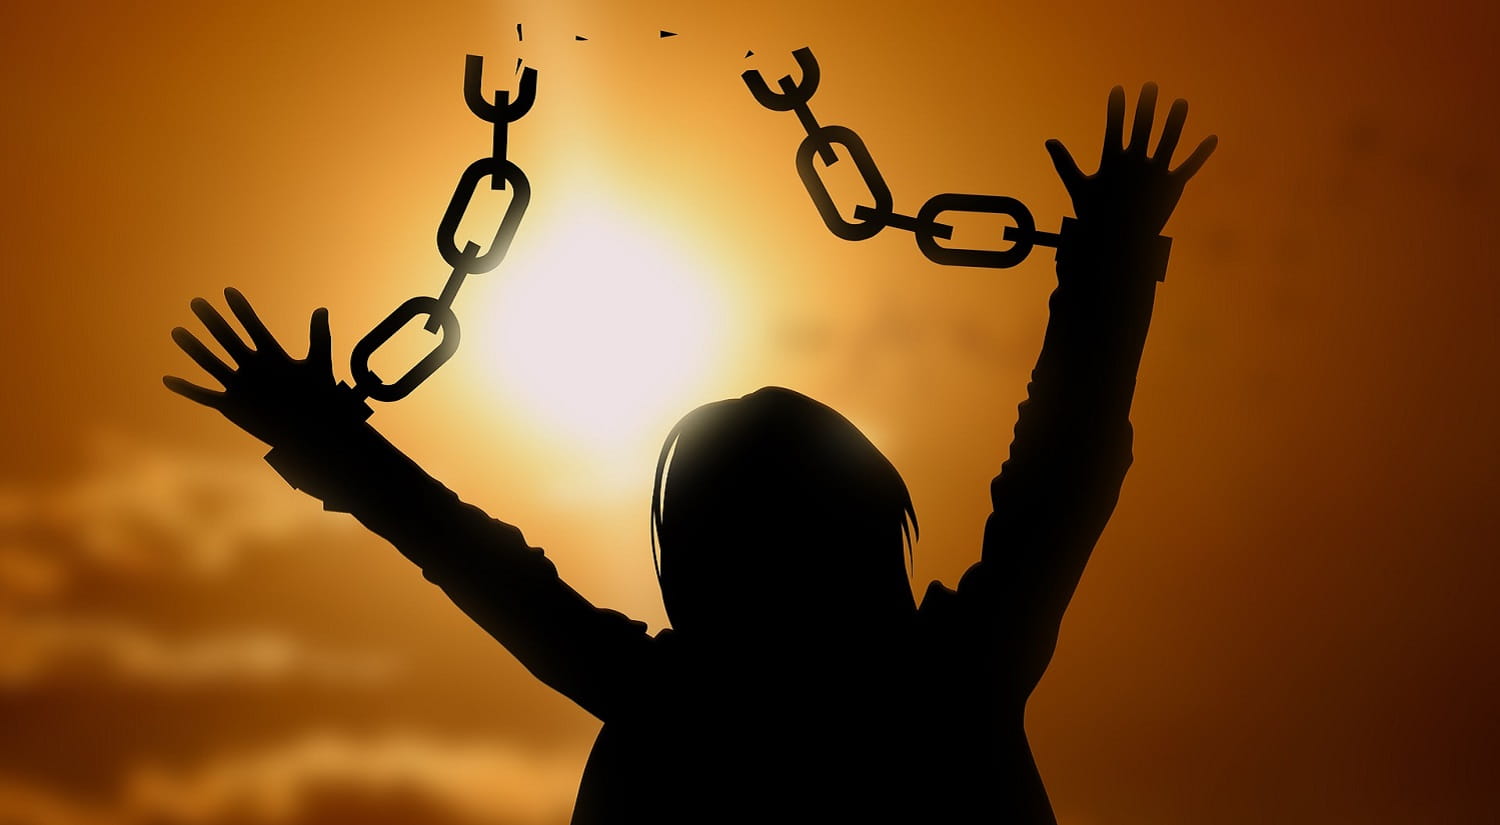 A person with chains breaking free, with the sun in the background, representing freedom.